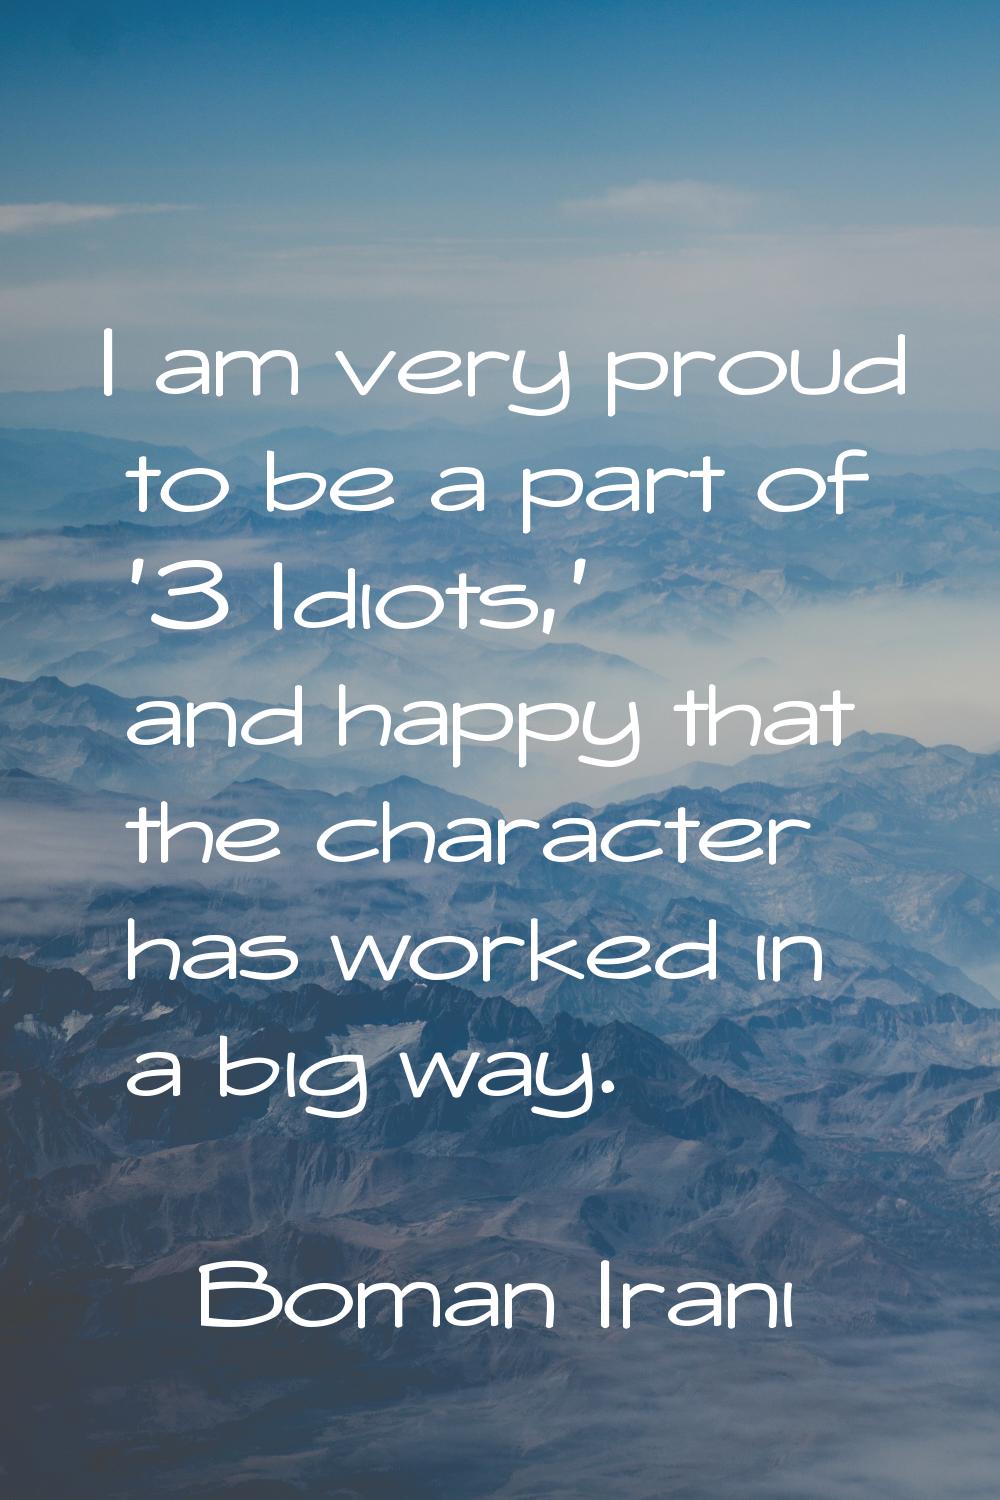 I am very proud to be a part of '3 Idiots,' and happy that the character has worked in a big way.